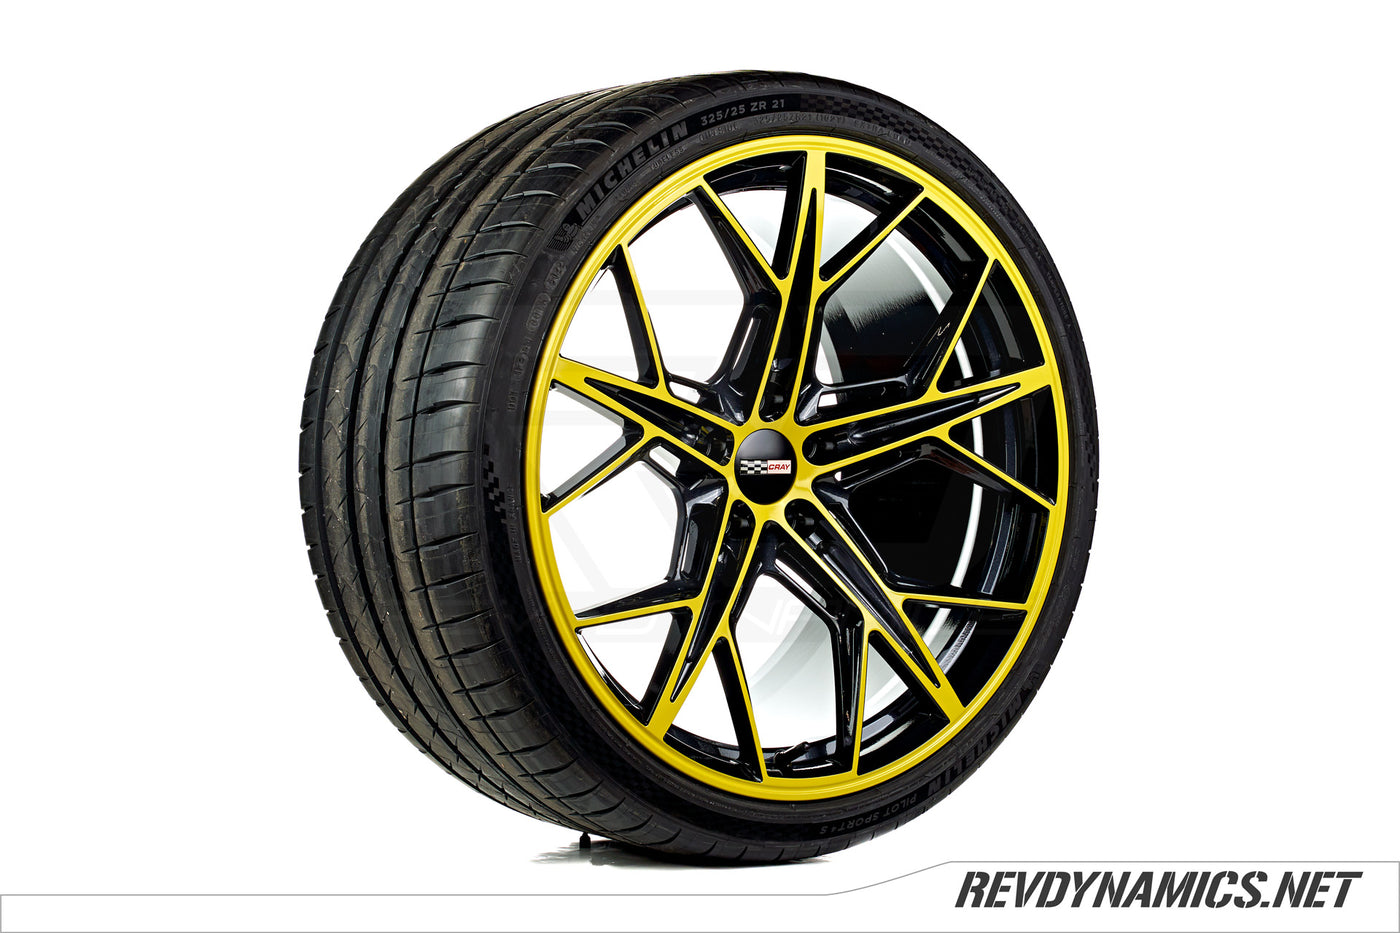 Cray Hammerhead 21" Rim Powdercoated Carbon Flash and Accelerate Yellow Corvette C8 colors 